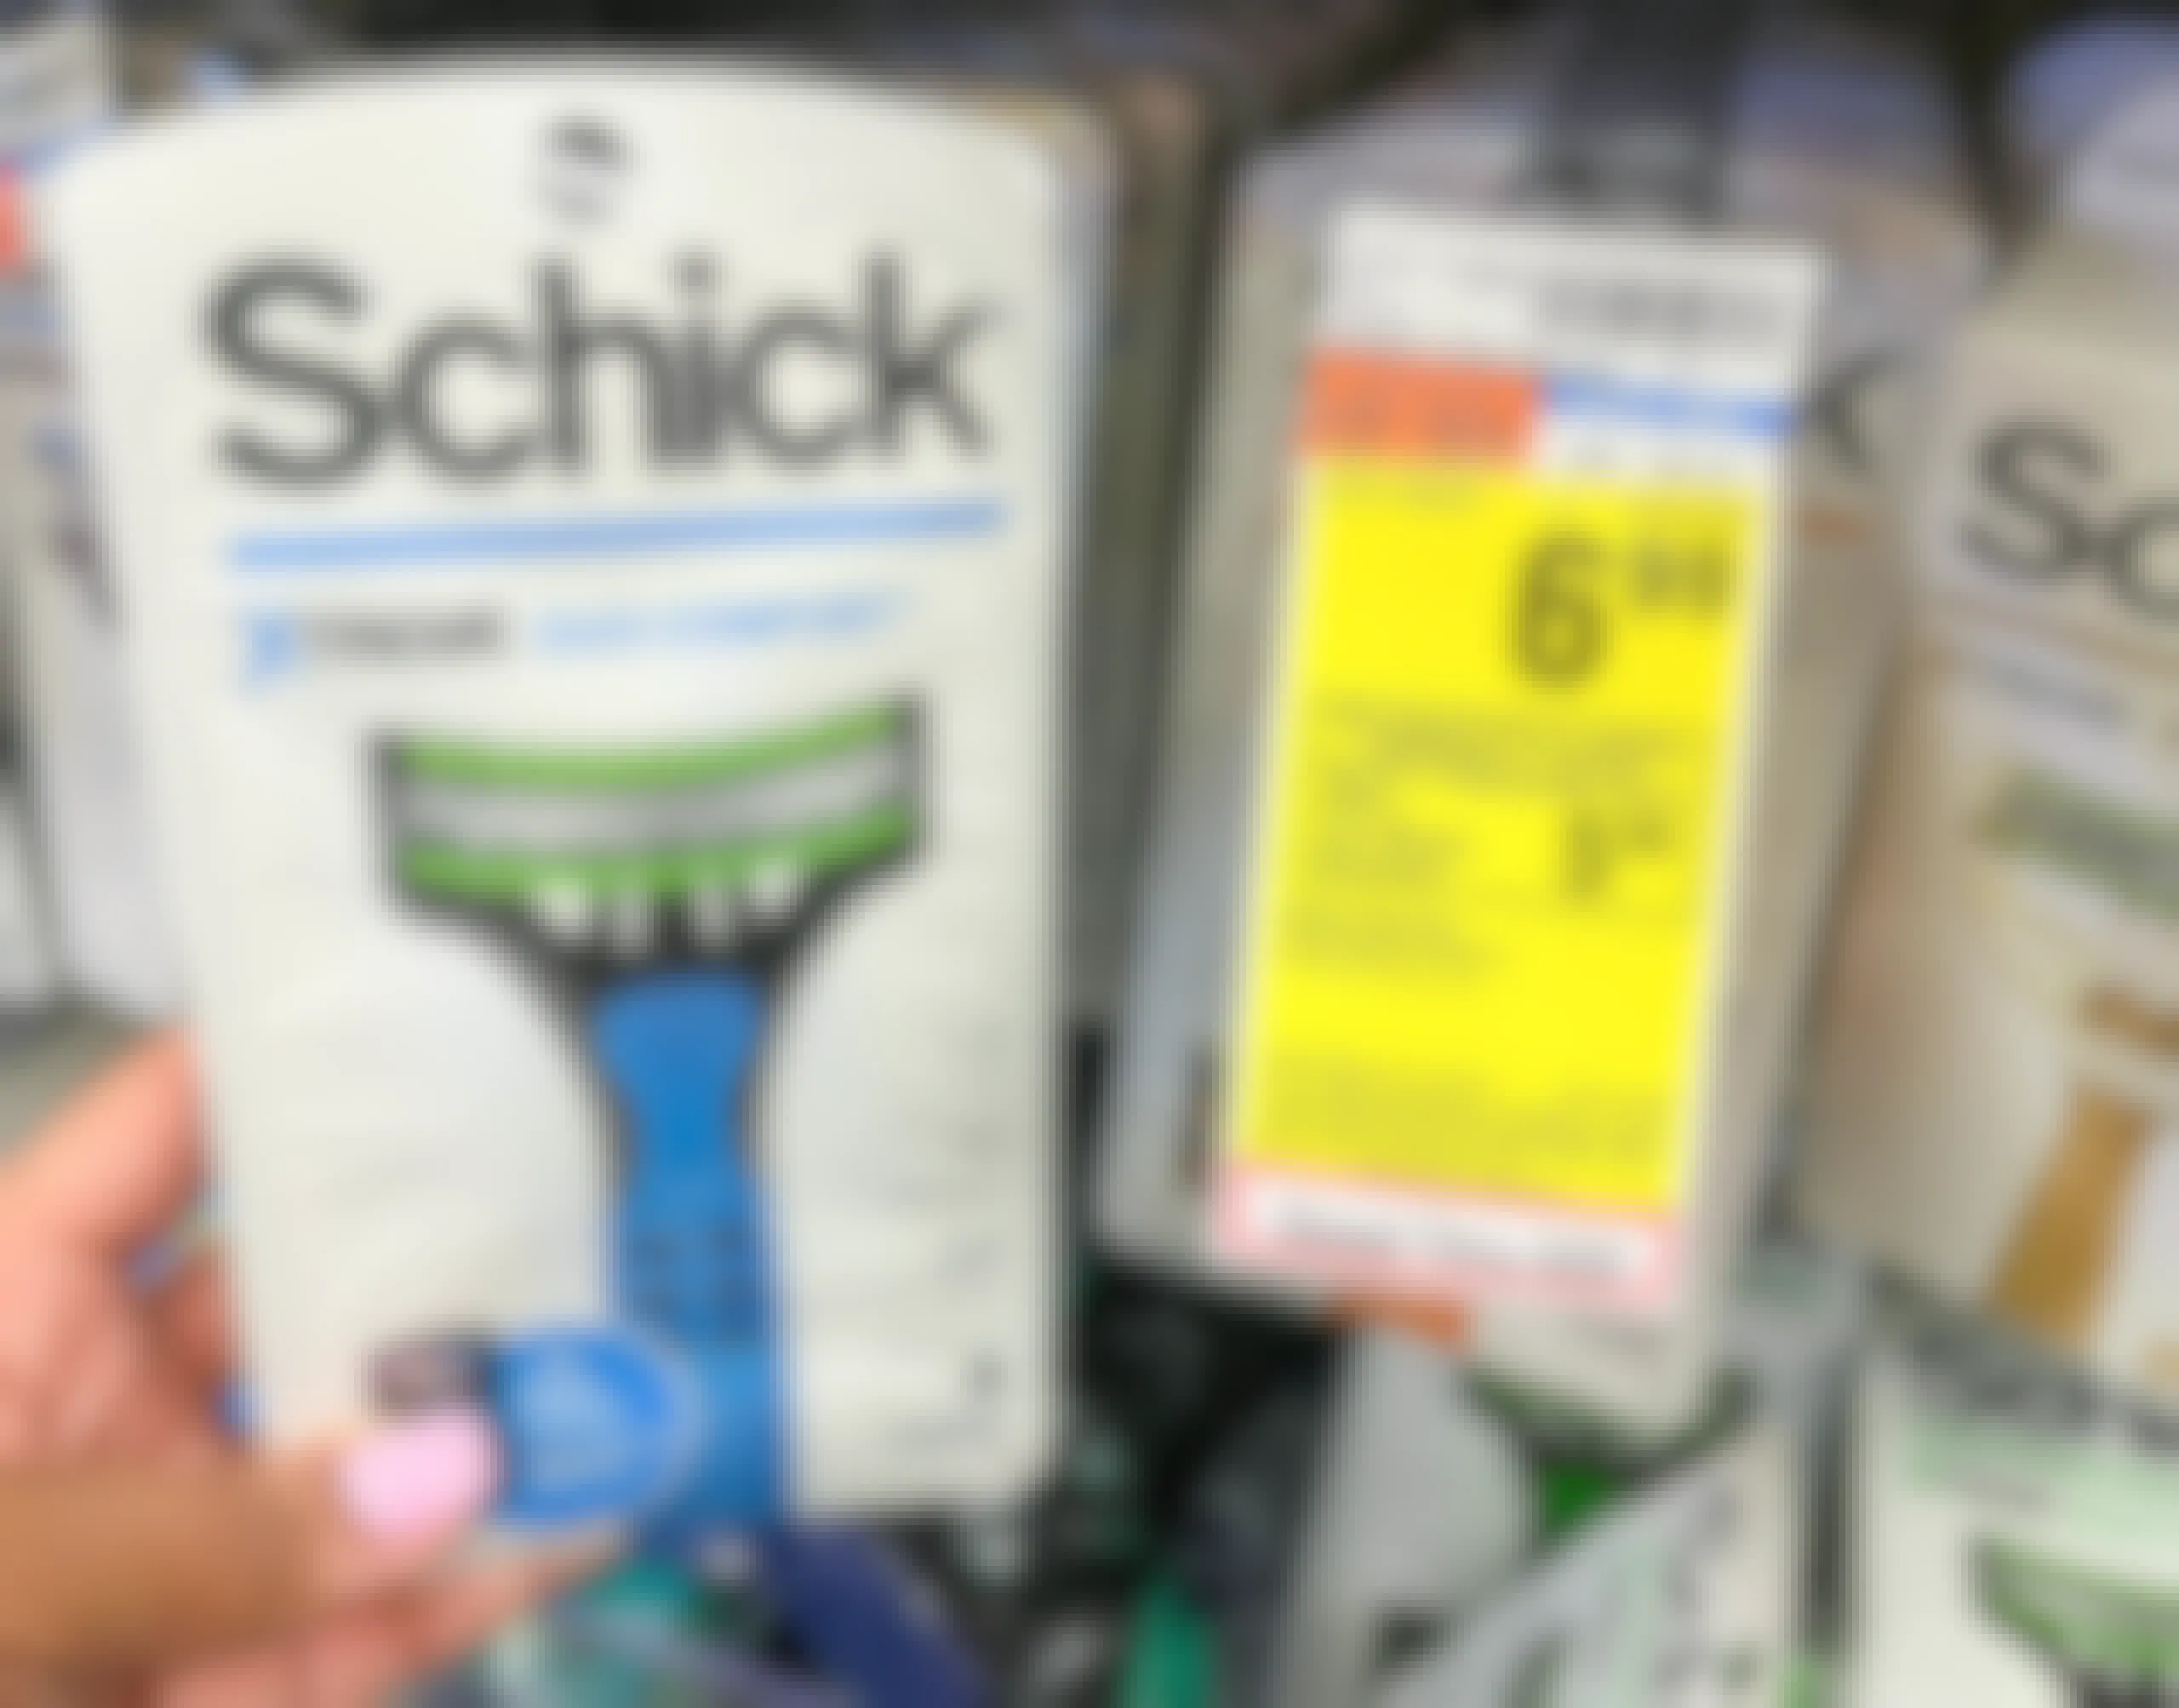 hand holding pack of Schick disposable razors next to sales tag